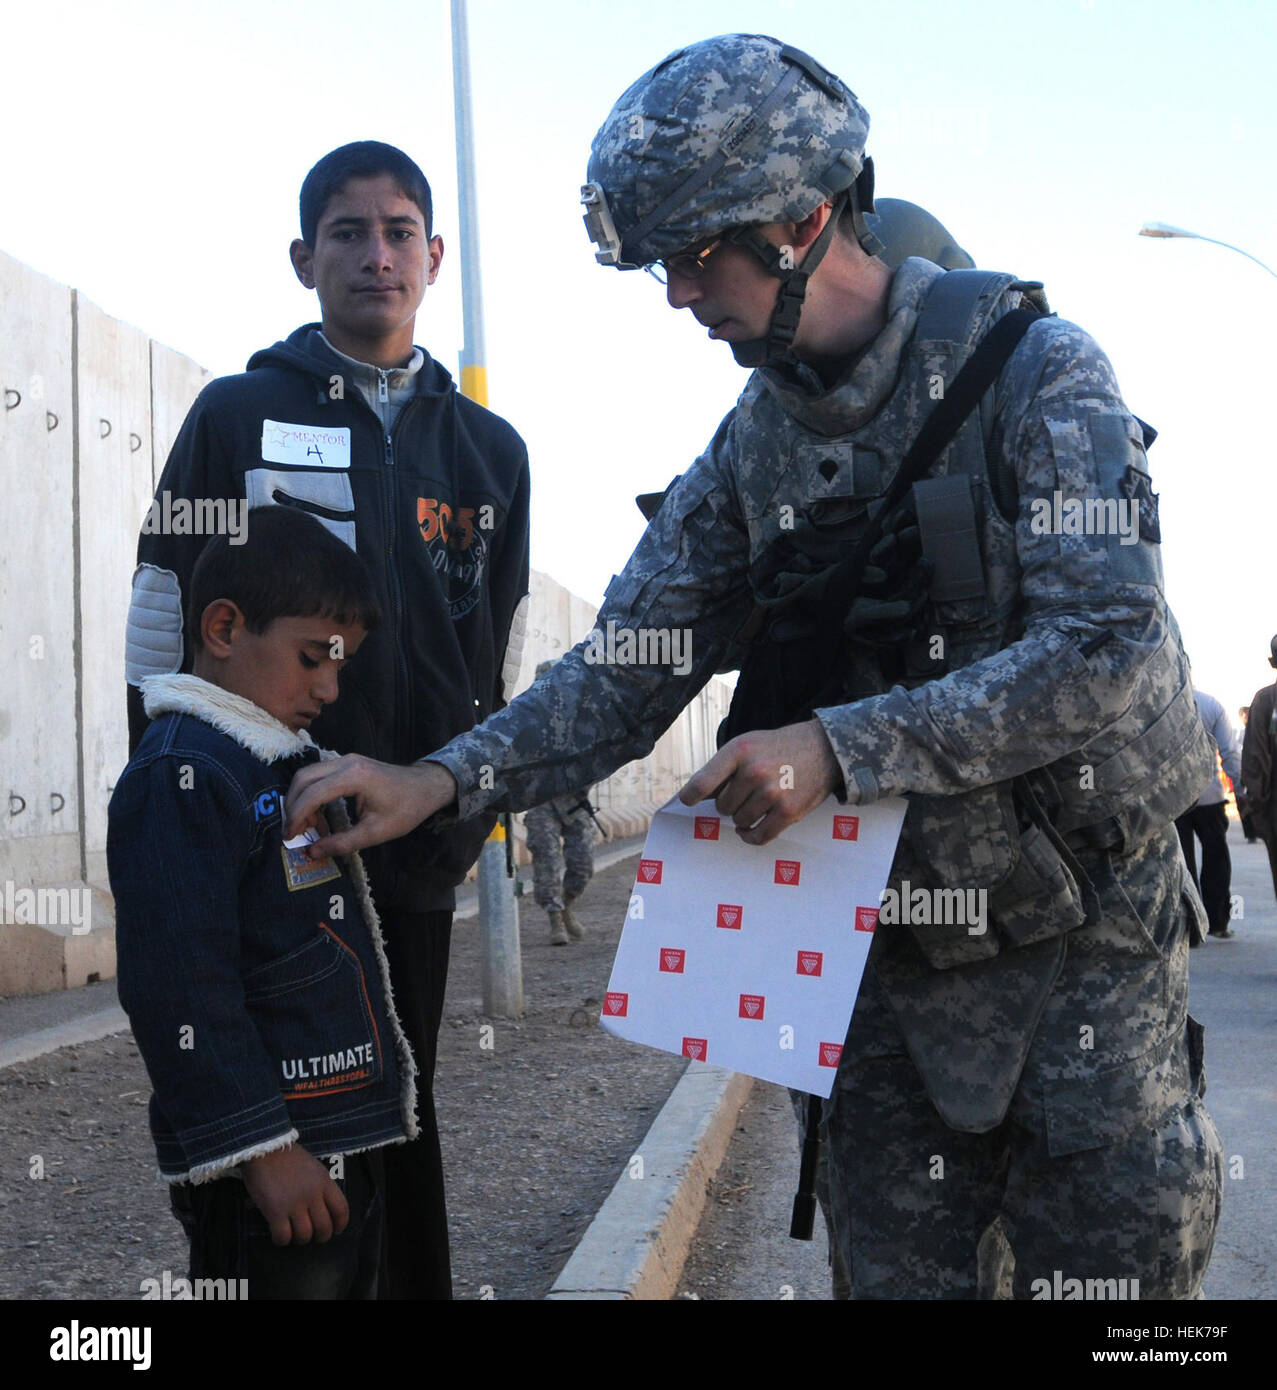 Spc. Zane Craig, public affairs specialist with the 109th Mobile Public Affairs Detachment, 103rd Sustainment Command (Expeditionary), and a Gettysburg, Pa., native, places a sticker onto a little boy's jacket allowing him access to Joint Base Balad, Iraq, during Iraqi Kids day on Nov. 5. More than 130 kids were given the opportunity to dance, play soccer, beanbag toss, and even ping-pong. Iraqi Kids Day 338190 Stock Photo